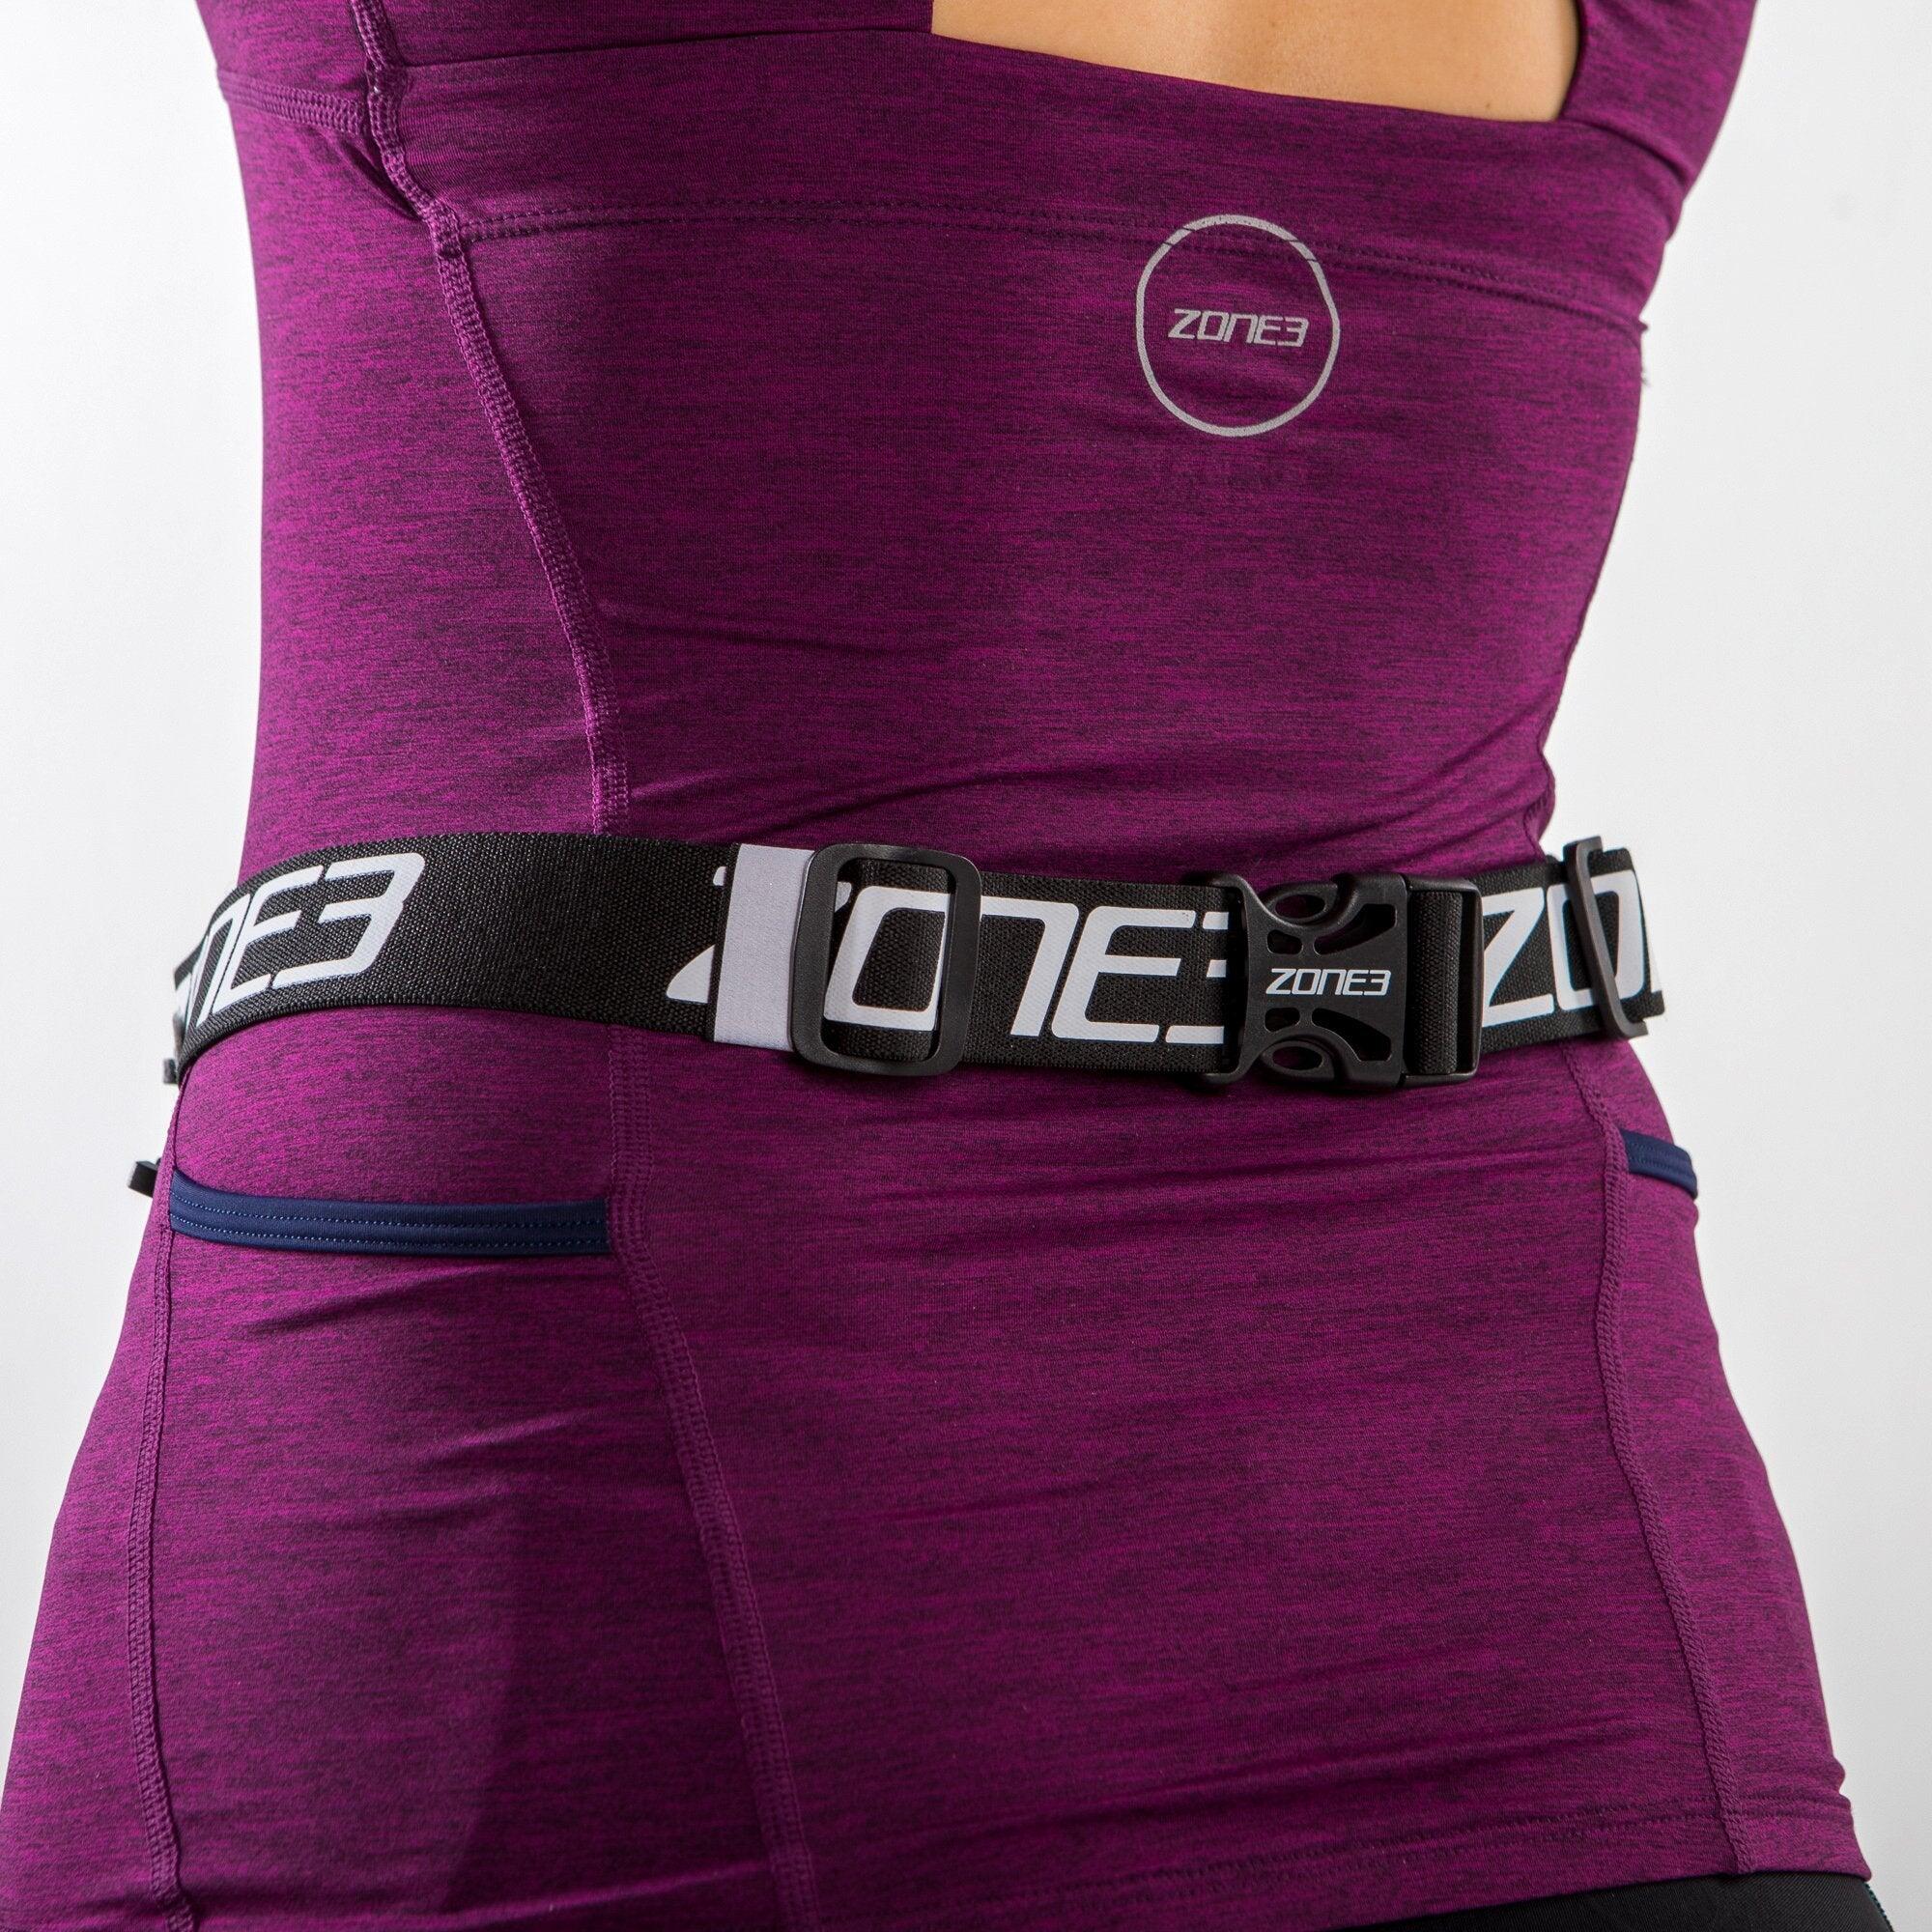 Endurance Number Belt with Neoprene Fuel Pouch and Energy Gel Storage 3/5